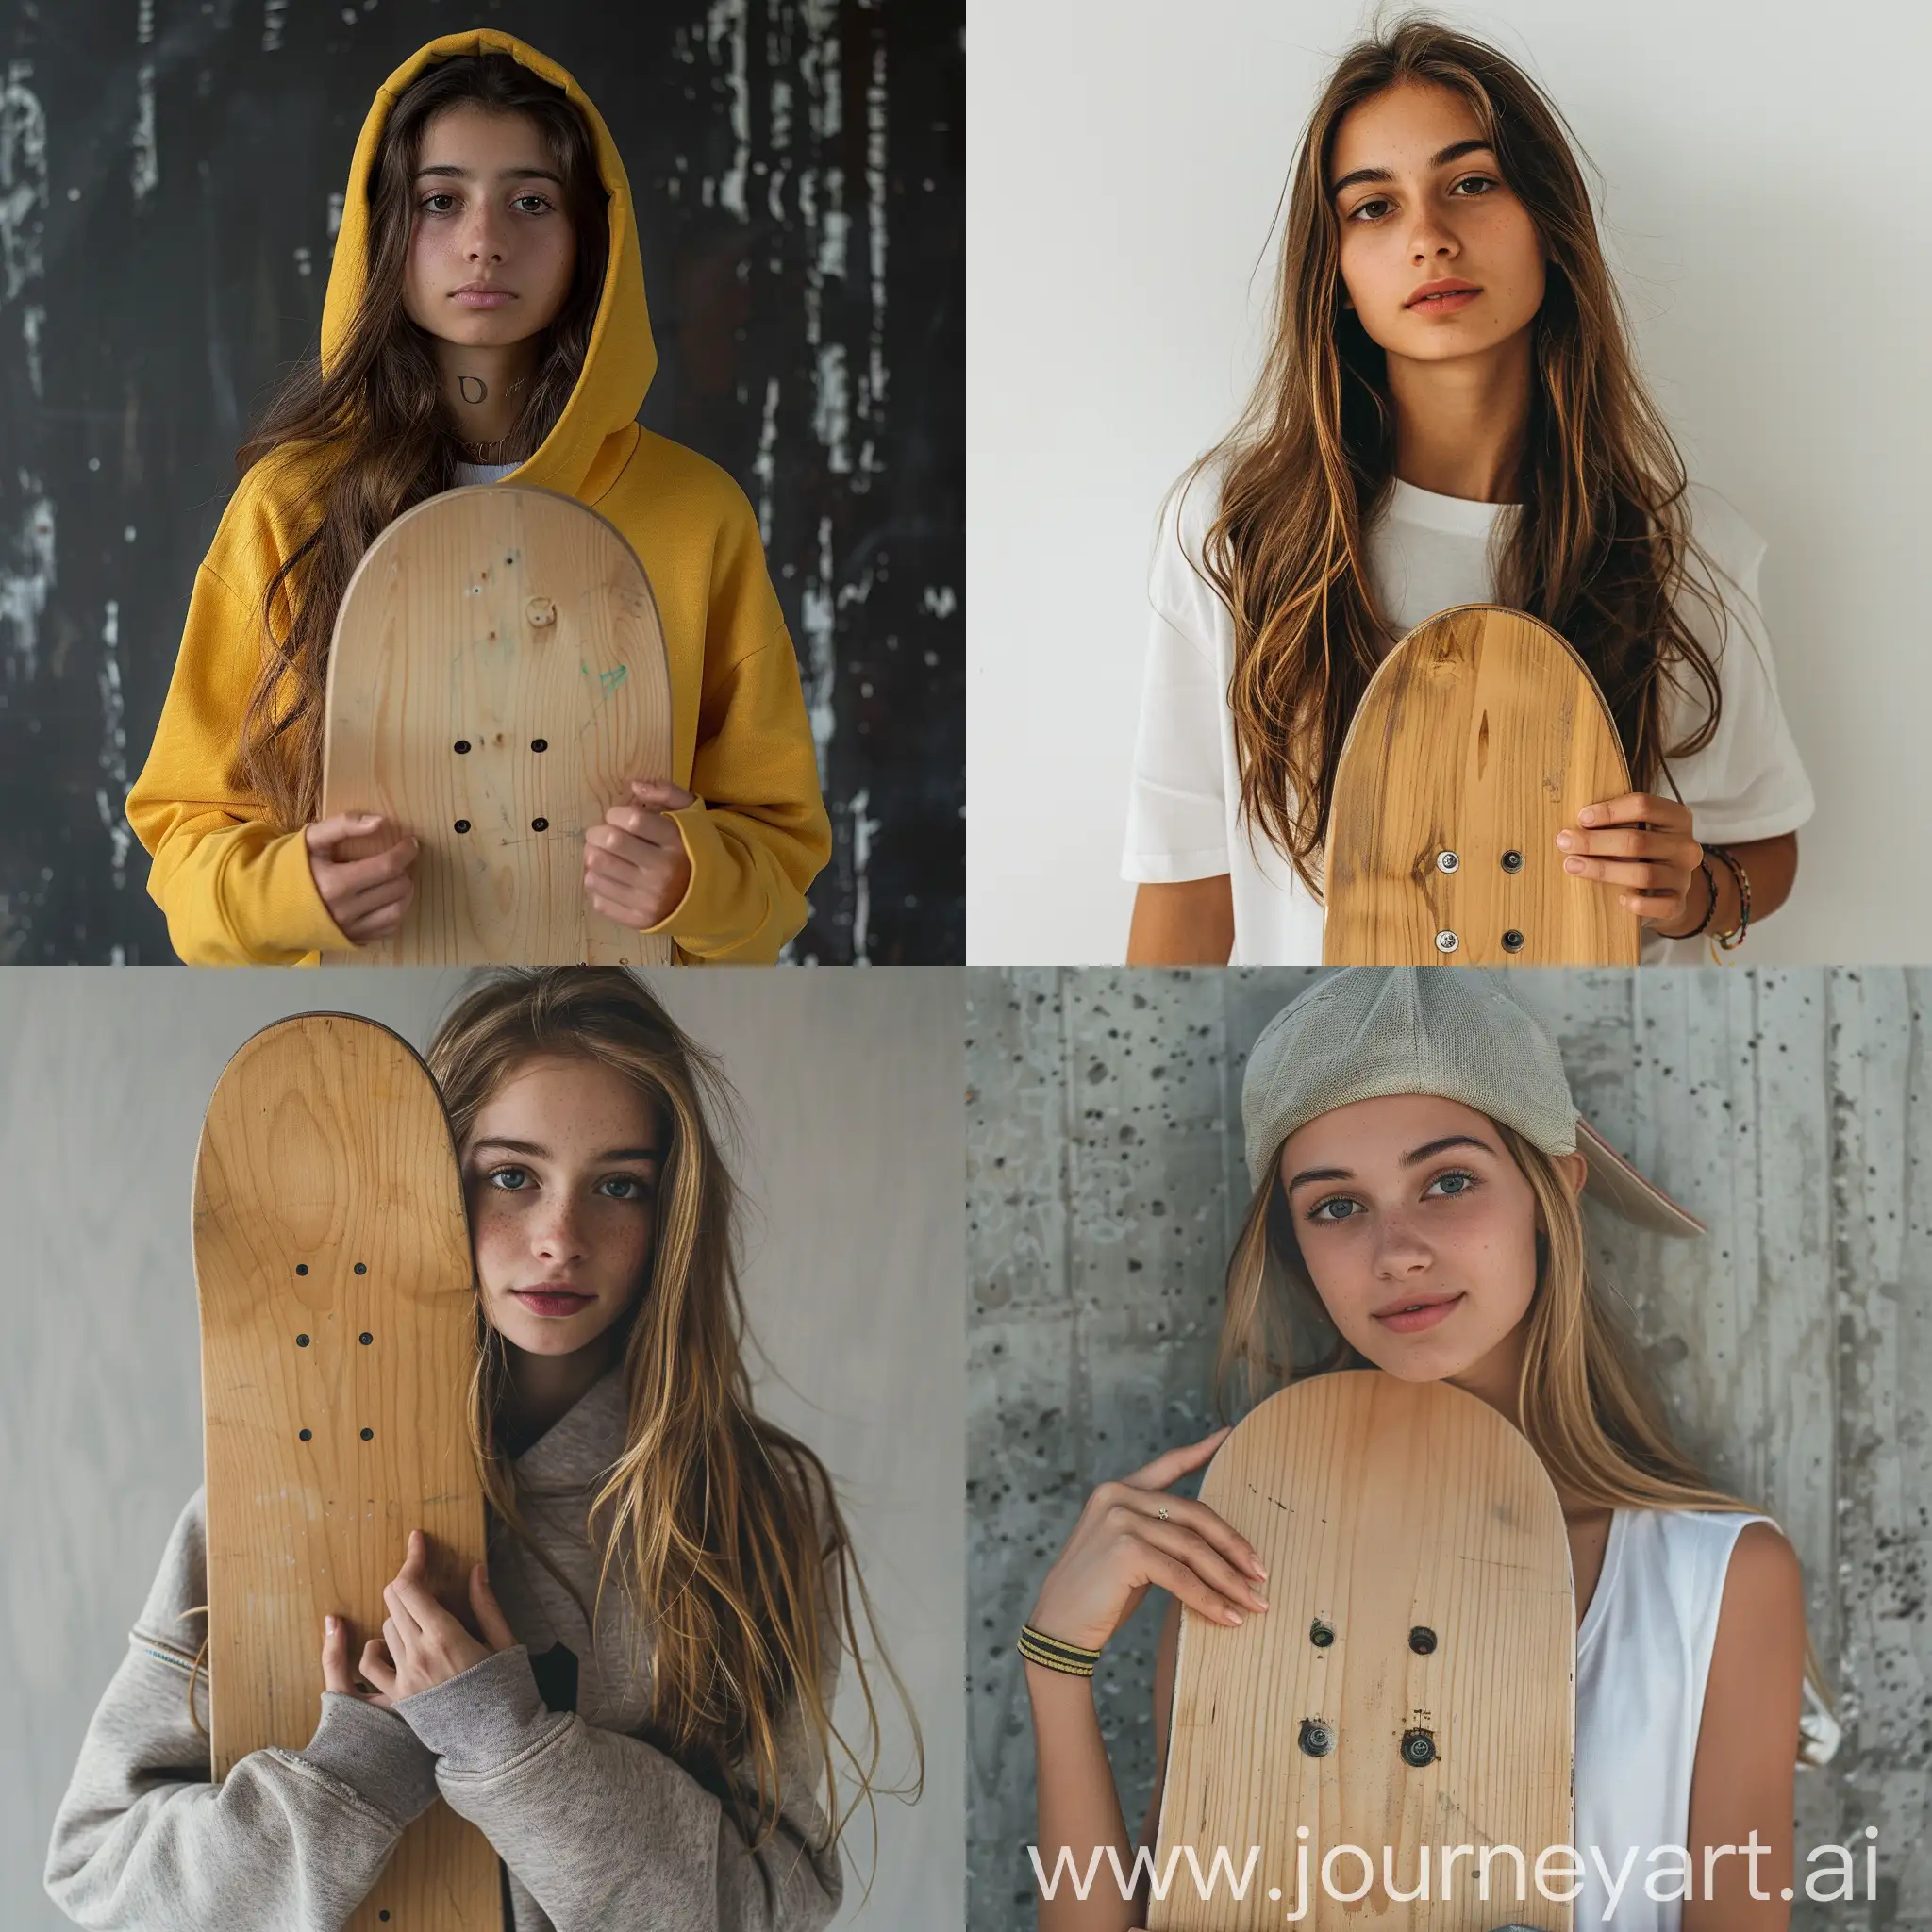 Young-Woman-Holding-Plain-Wooden-Skateboard-Vertically-in-Portrait-View